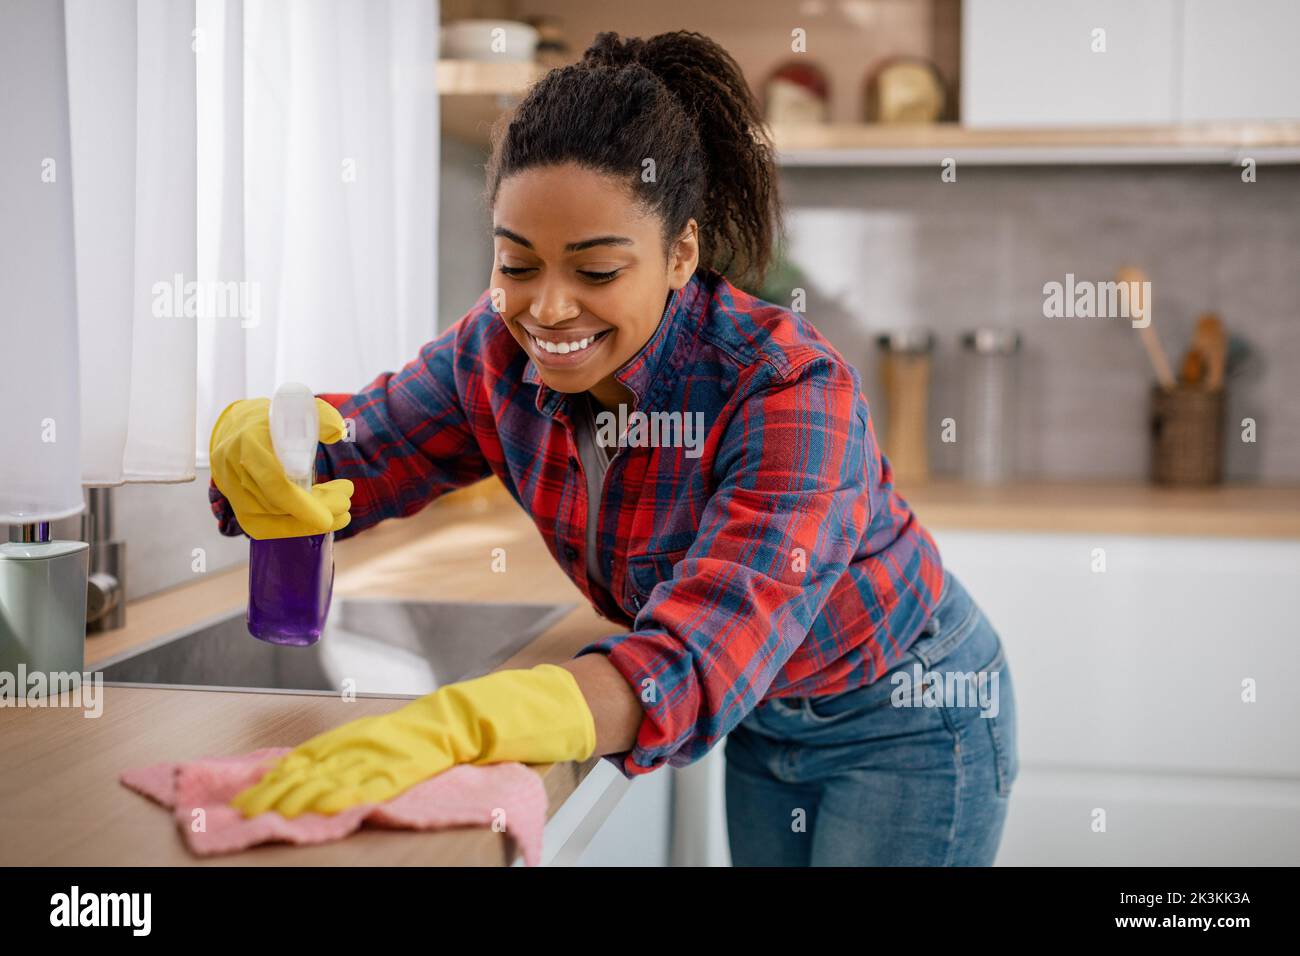 Cheerful young black woman wipes table from dirt with cleaning supplies in minimalist kitchen interior Stock Photo